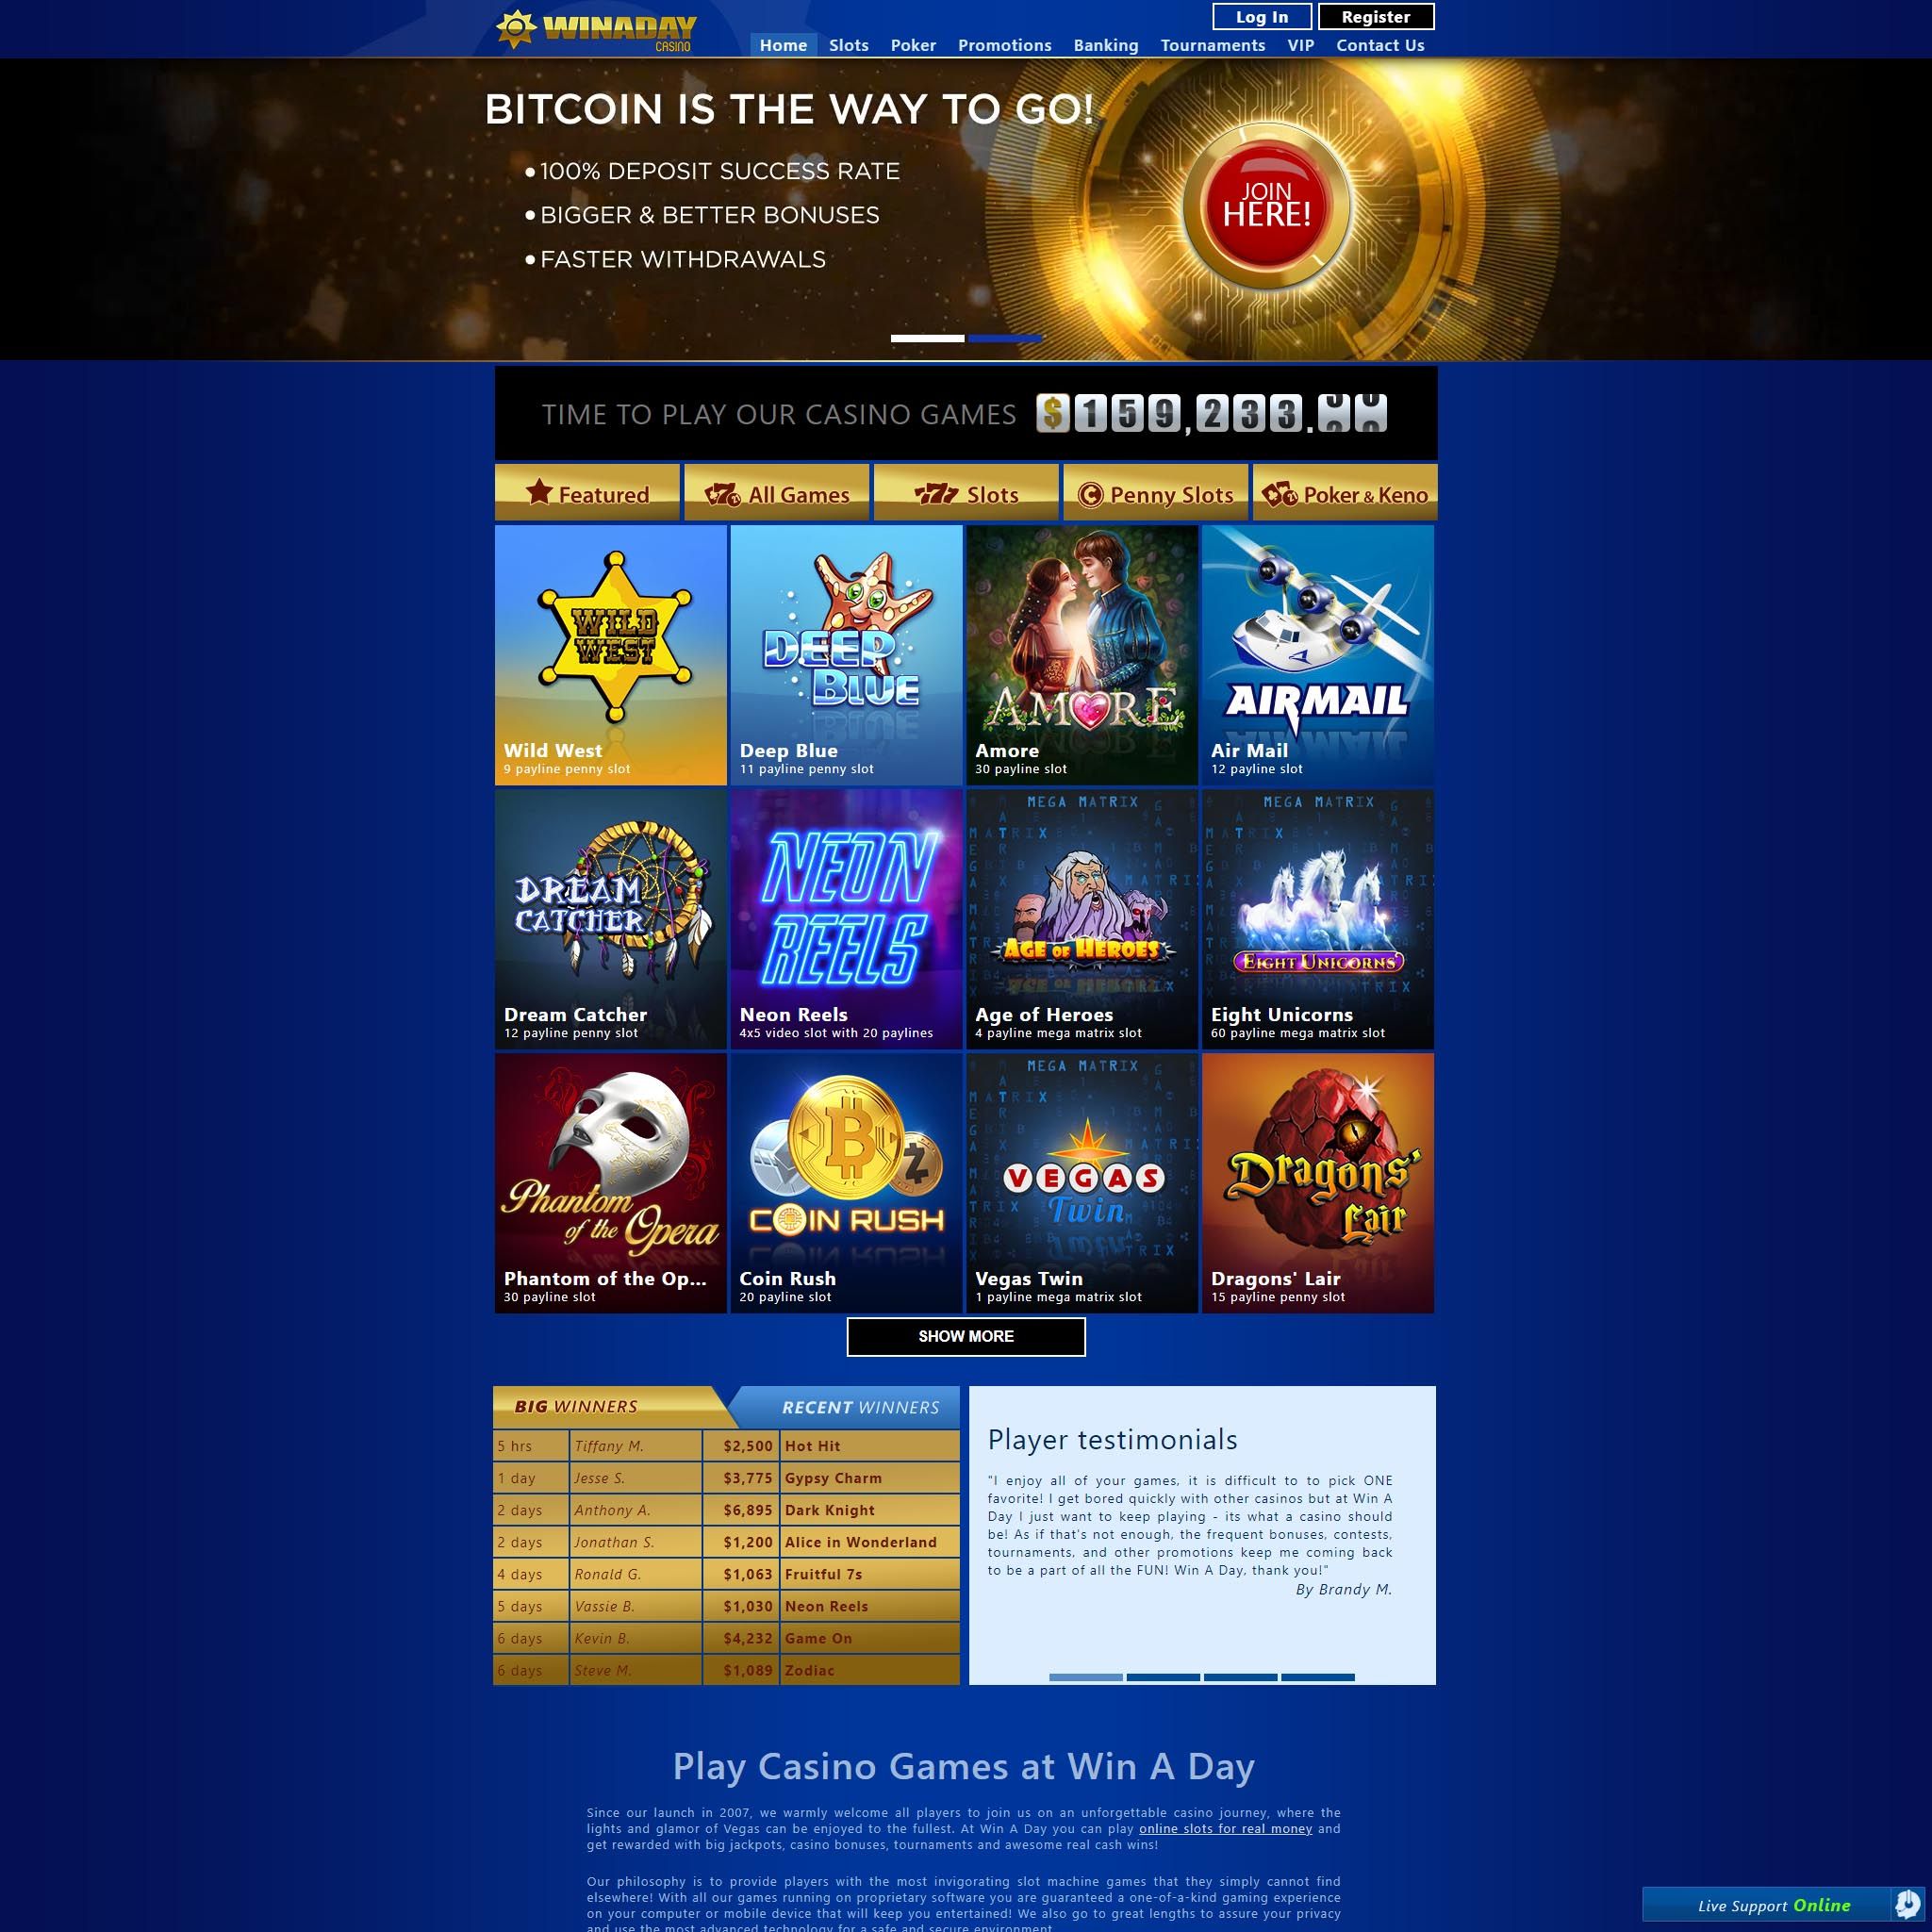 Winaday Casino review by Mr. Gamble